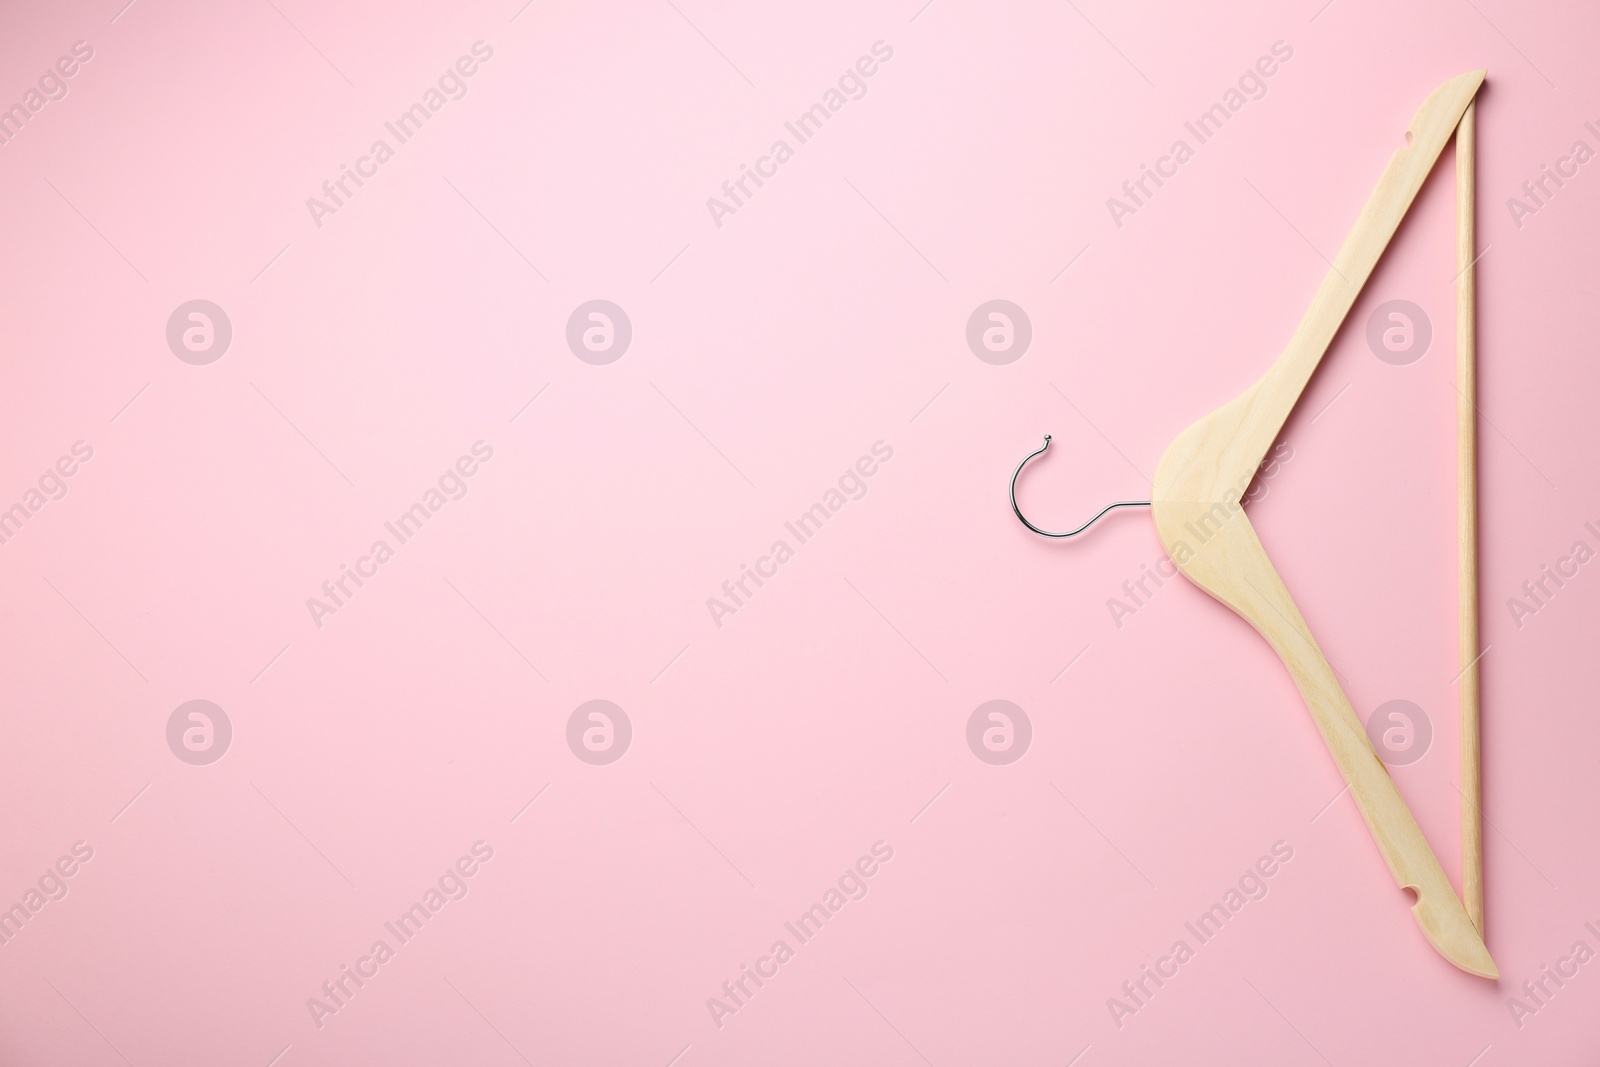 Photo of Wooden hanger on pink background, top view